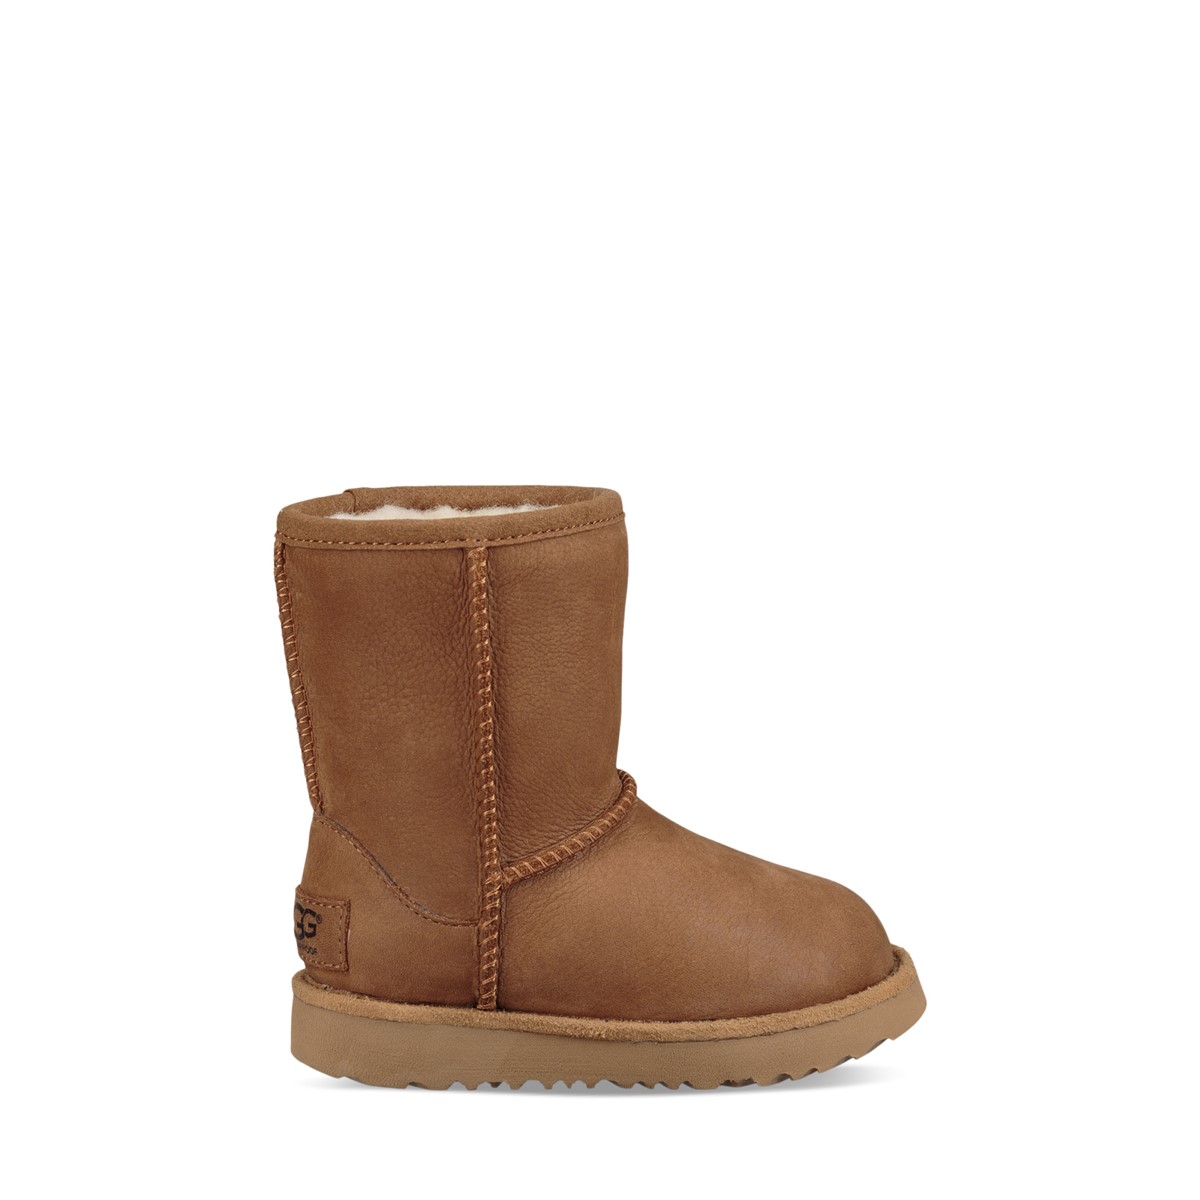 Toddler's Classic II Short Weather Boots in Chestnut